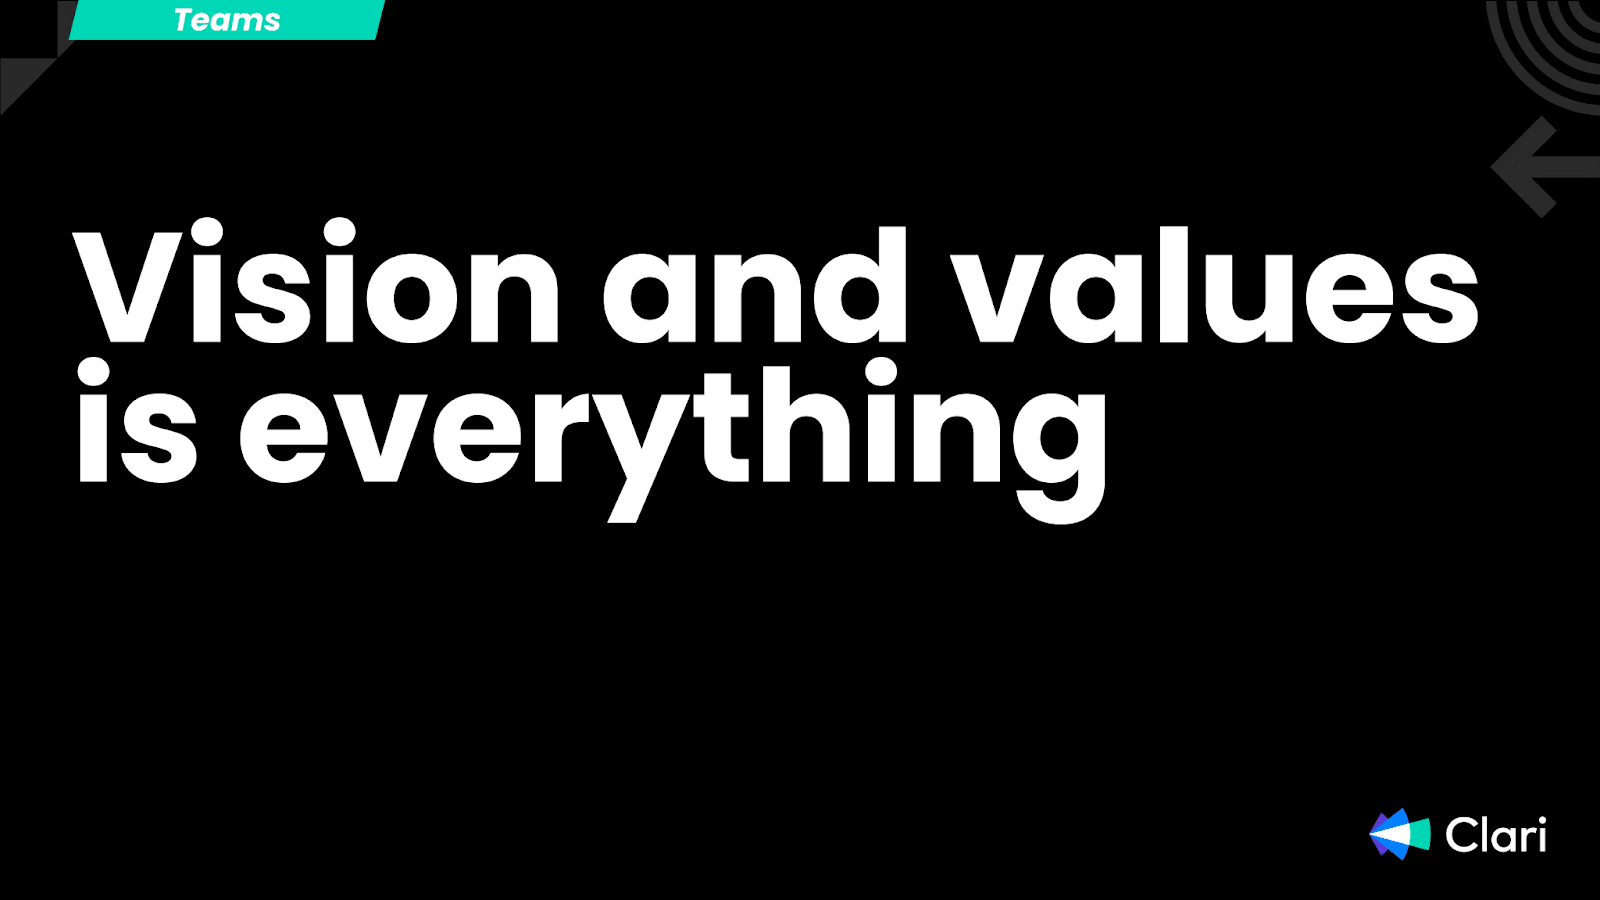 Vision and values are everything